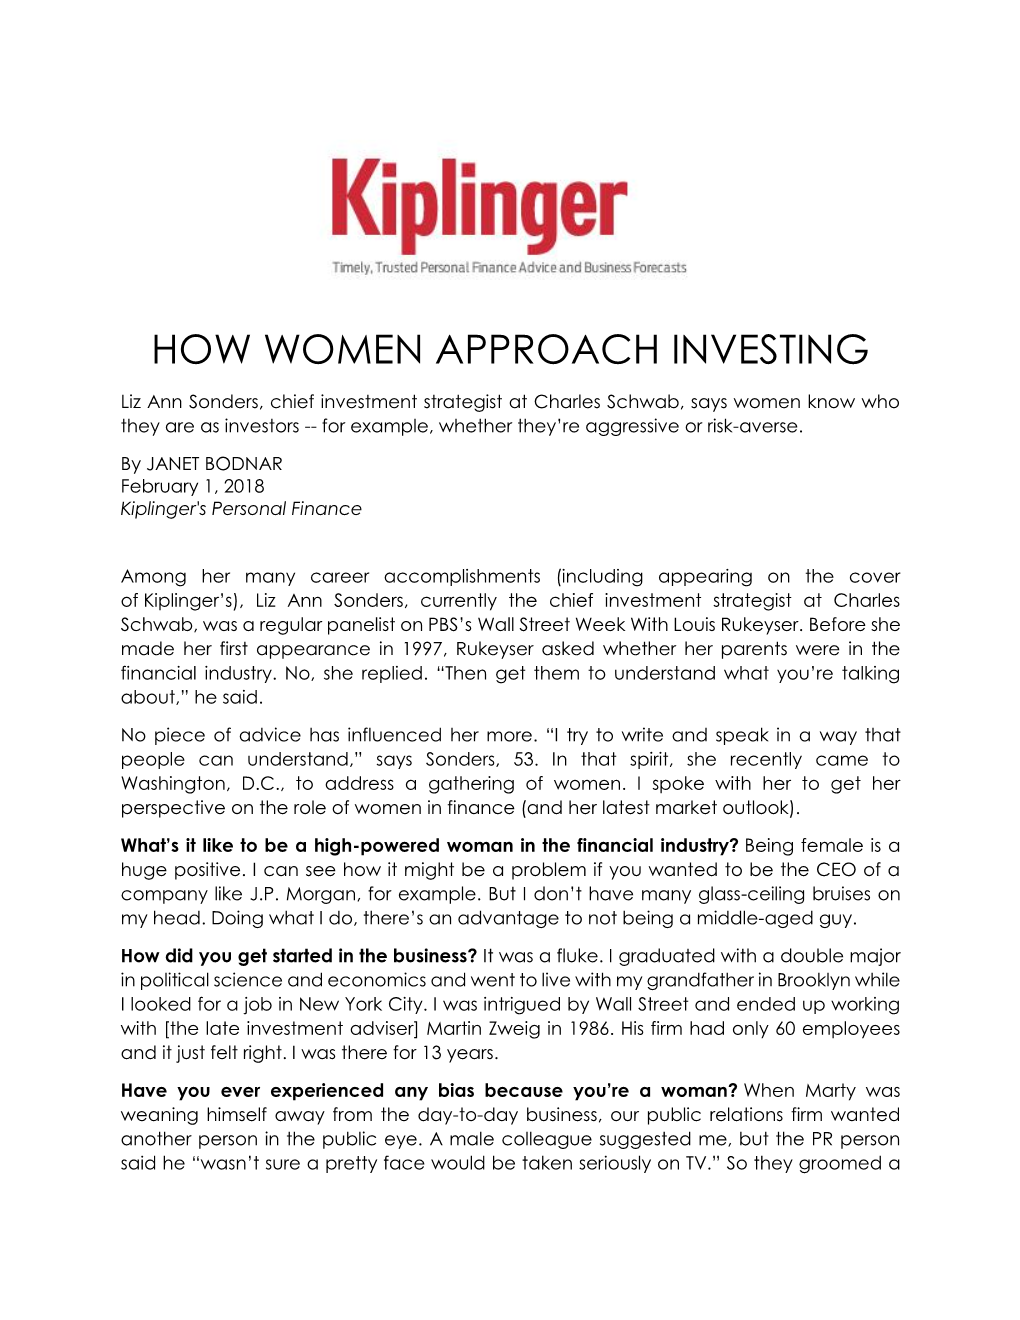 How Women Approach Investing